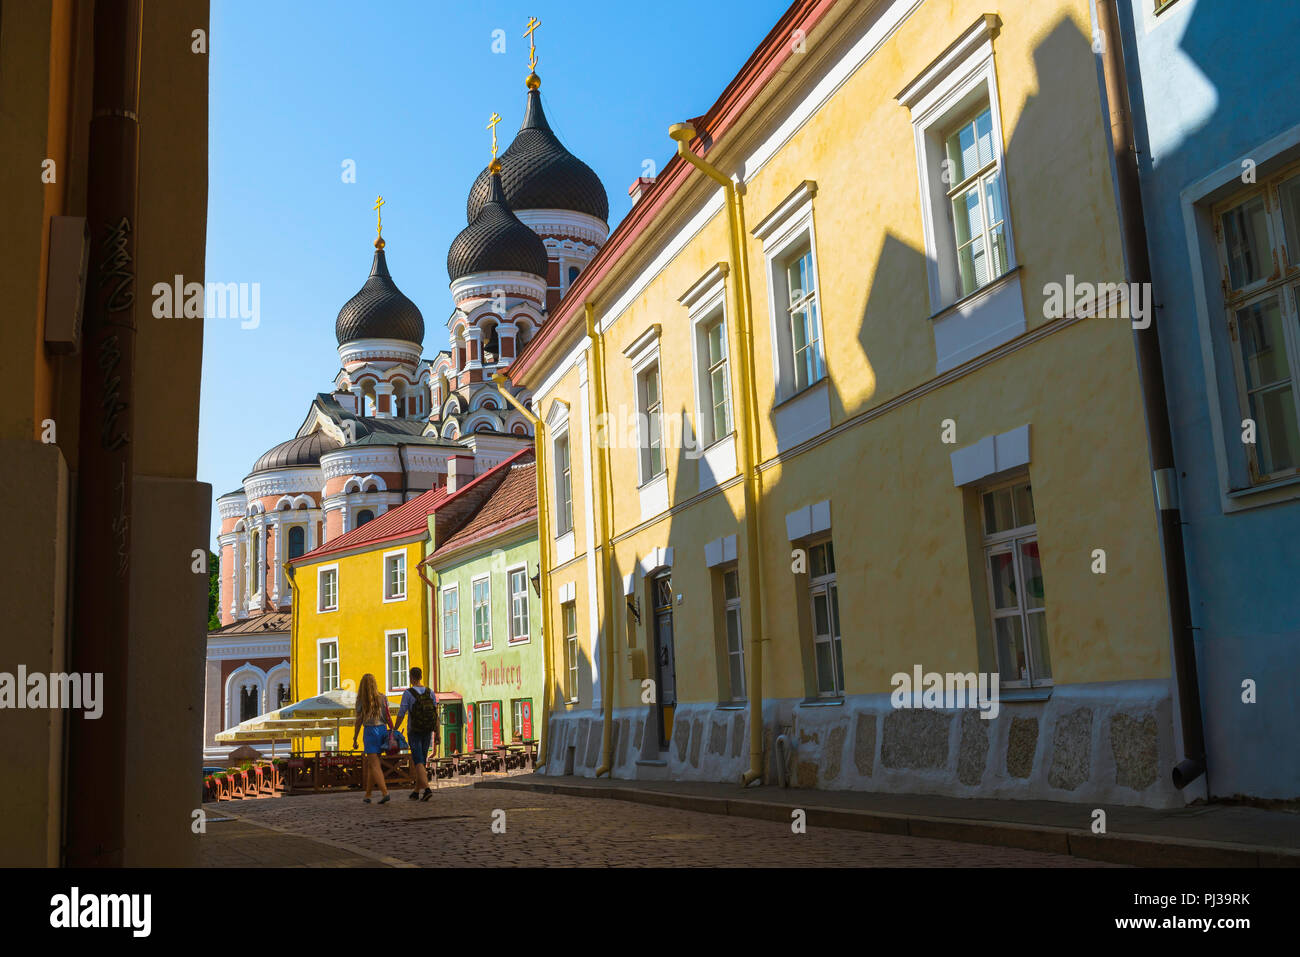 Young people travel, view in summer of two young people walking along a colorful street on Toompea Hill in Tallinn, Estonia. Stock Photo